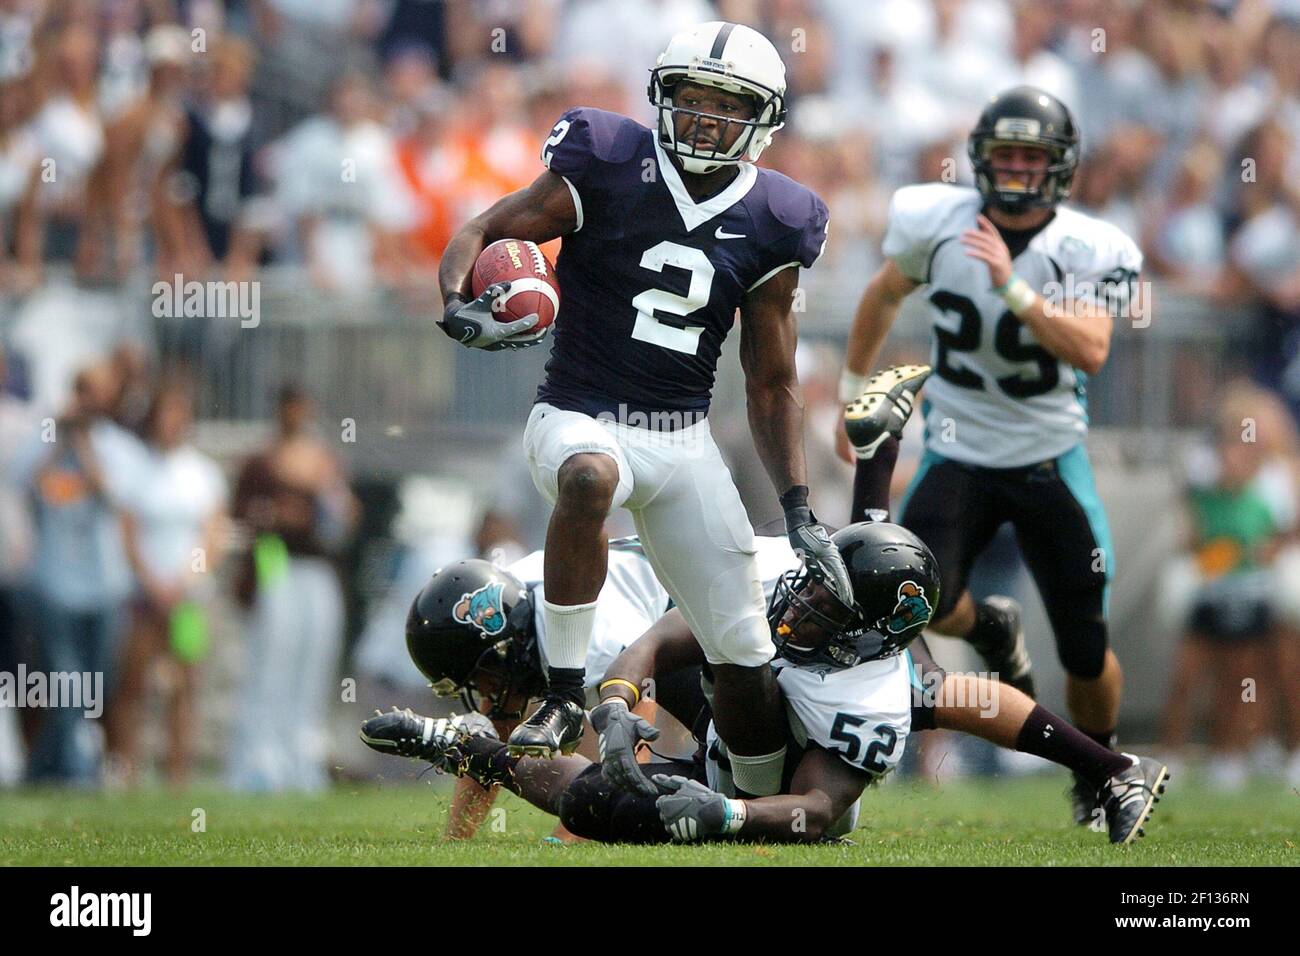 Penn State's Derrick Williams (2) breaks free of Coastal Carolina's E.J.  Brown (52) at Beaver Stadium in State College, Pennsylvania, on Saturday,  August 30, 2008. (Photo by Mark Johnston/Centre Daily Times/MCT/Sipa USA